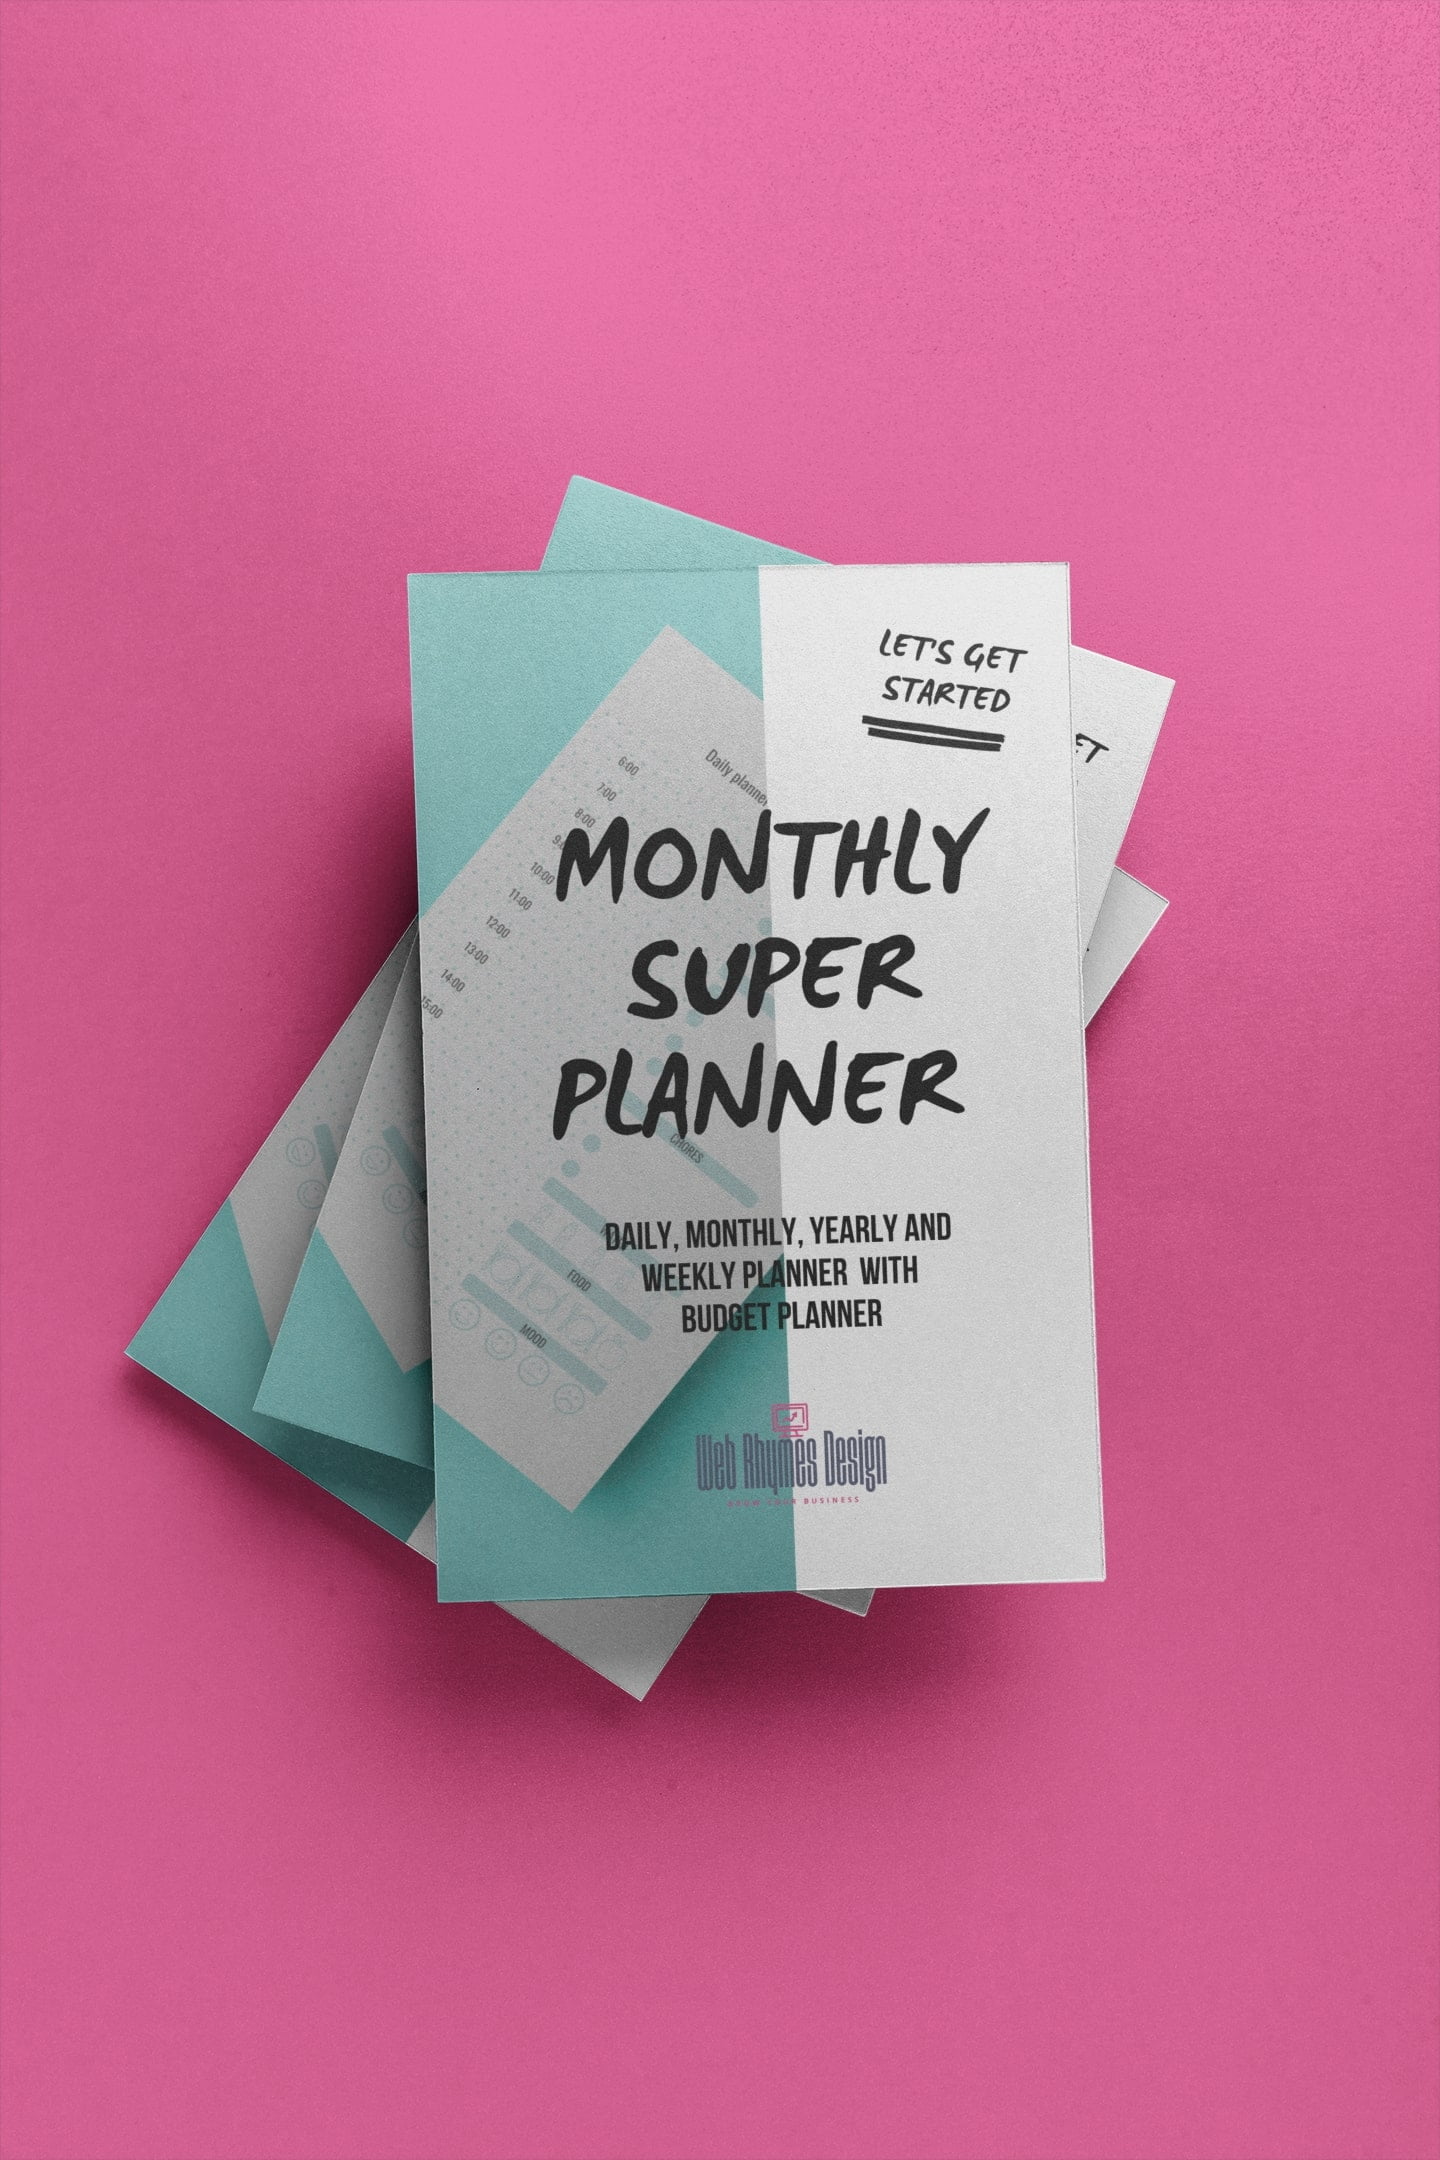 MONTHLY PLANNER WEB RHYMES DESIGN